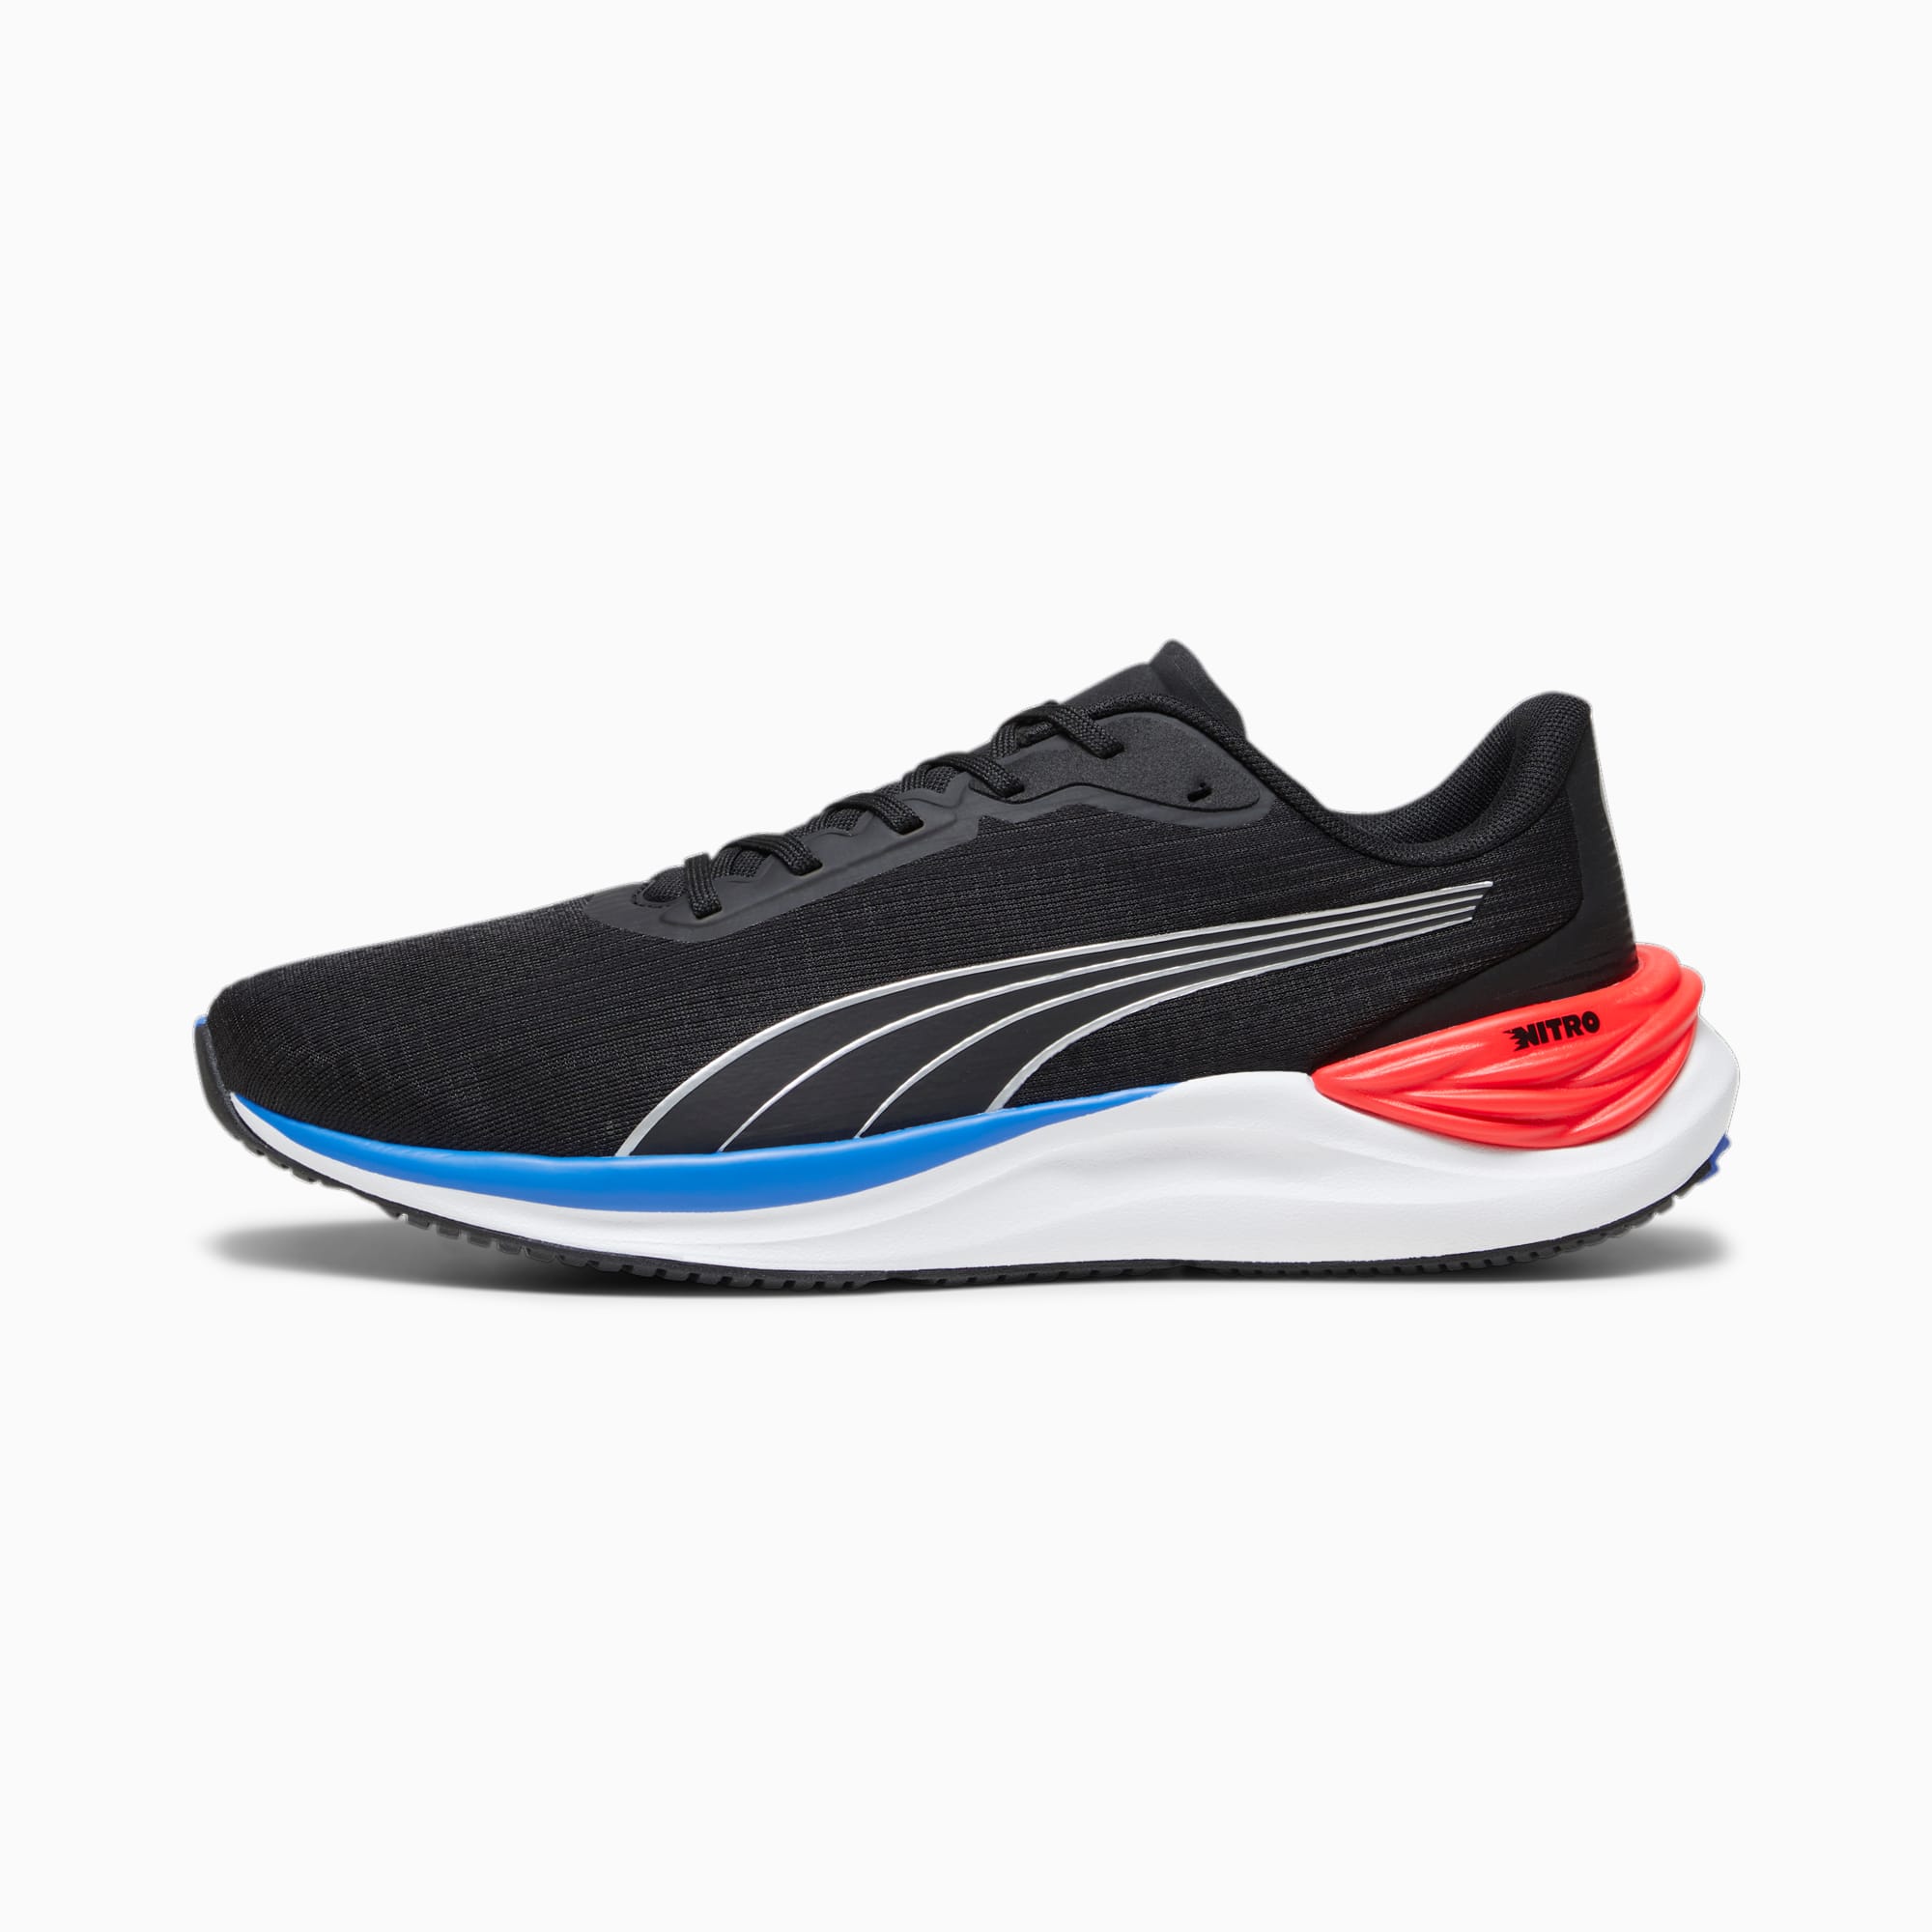 PUMA Electrify Nitro™ 3 Men's Running Shoes, Black/For All Time Red